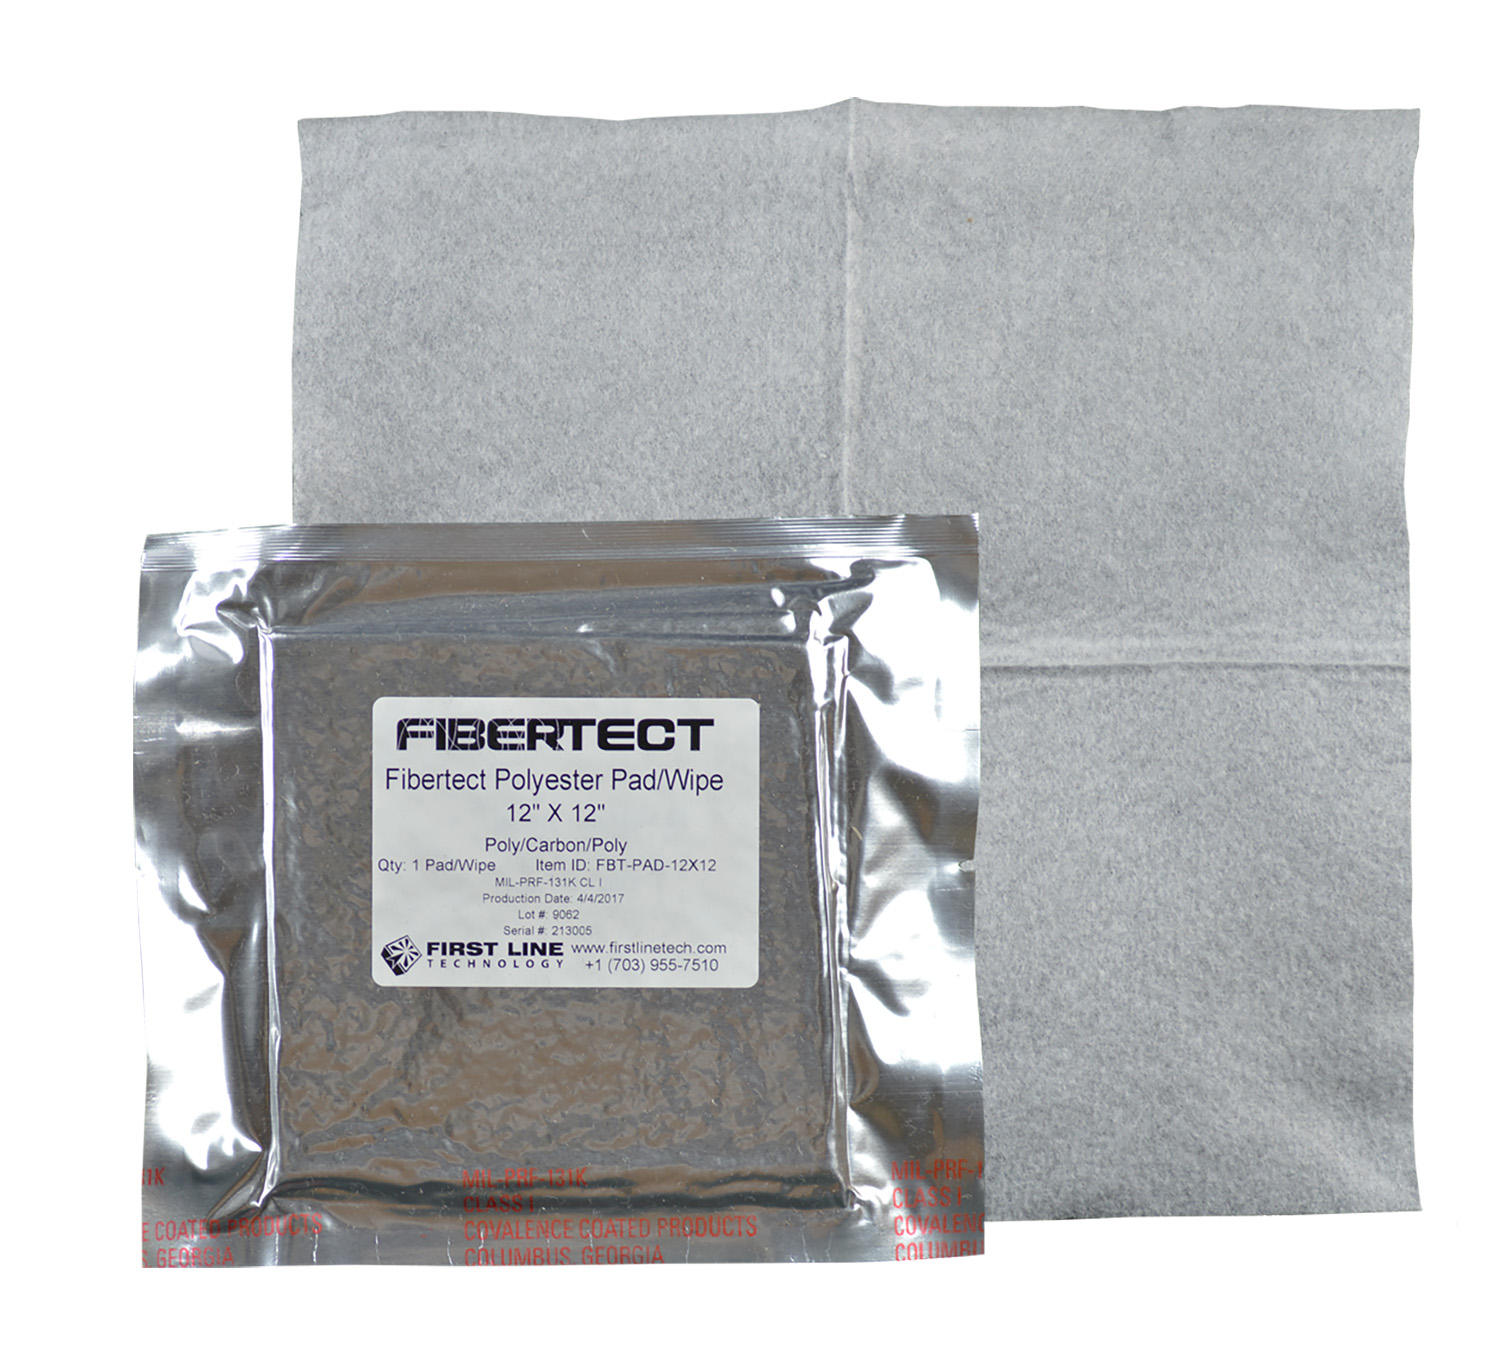 patented FiberTect (Photo courtesy First Line Technology)